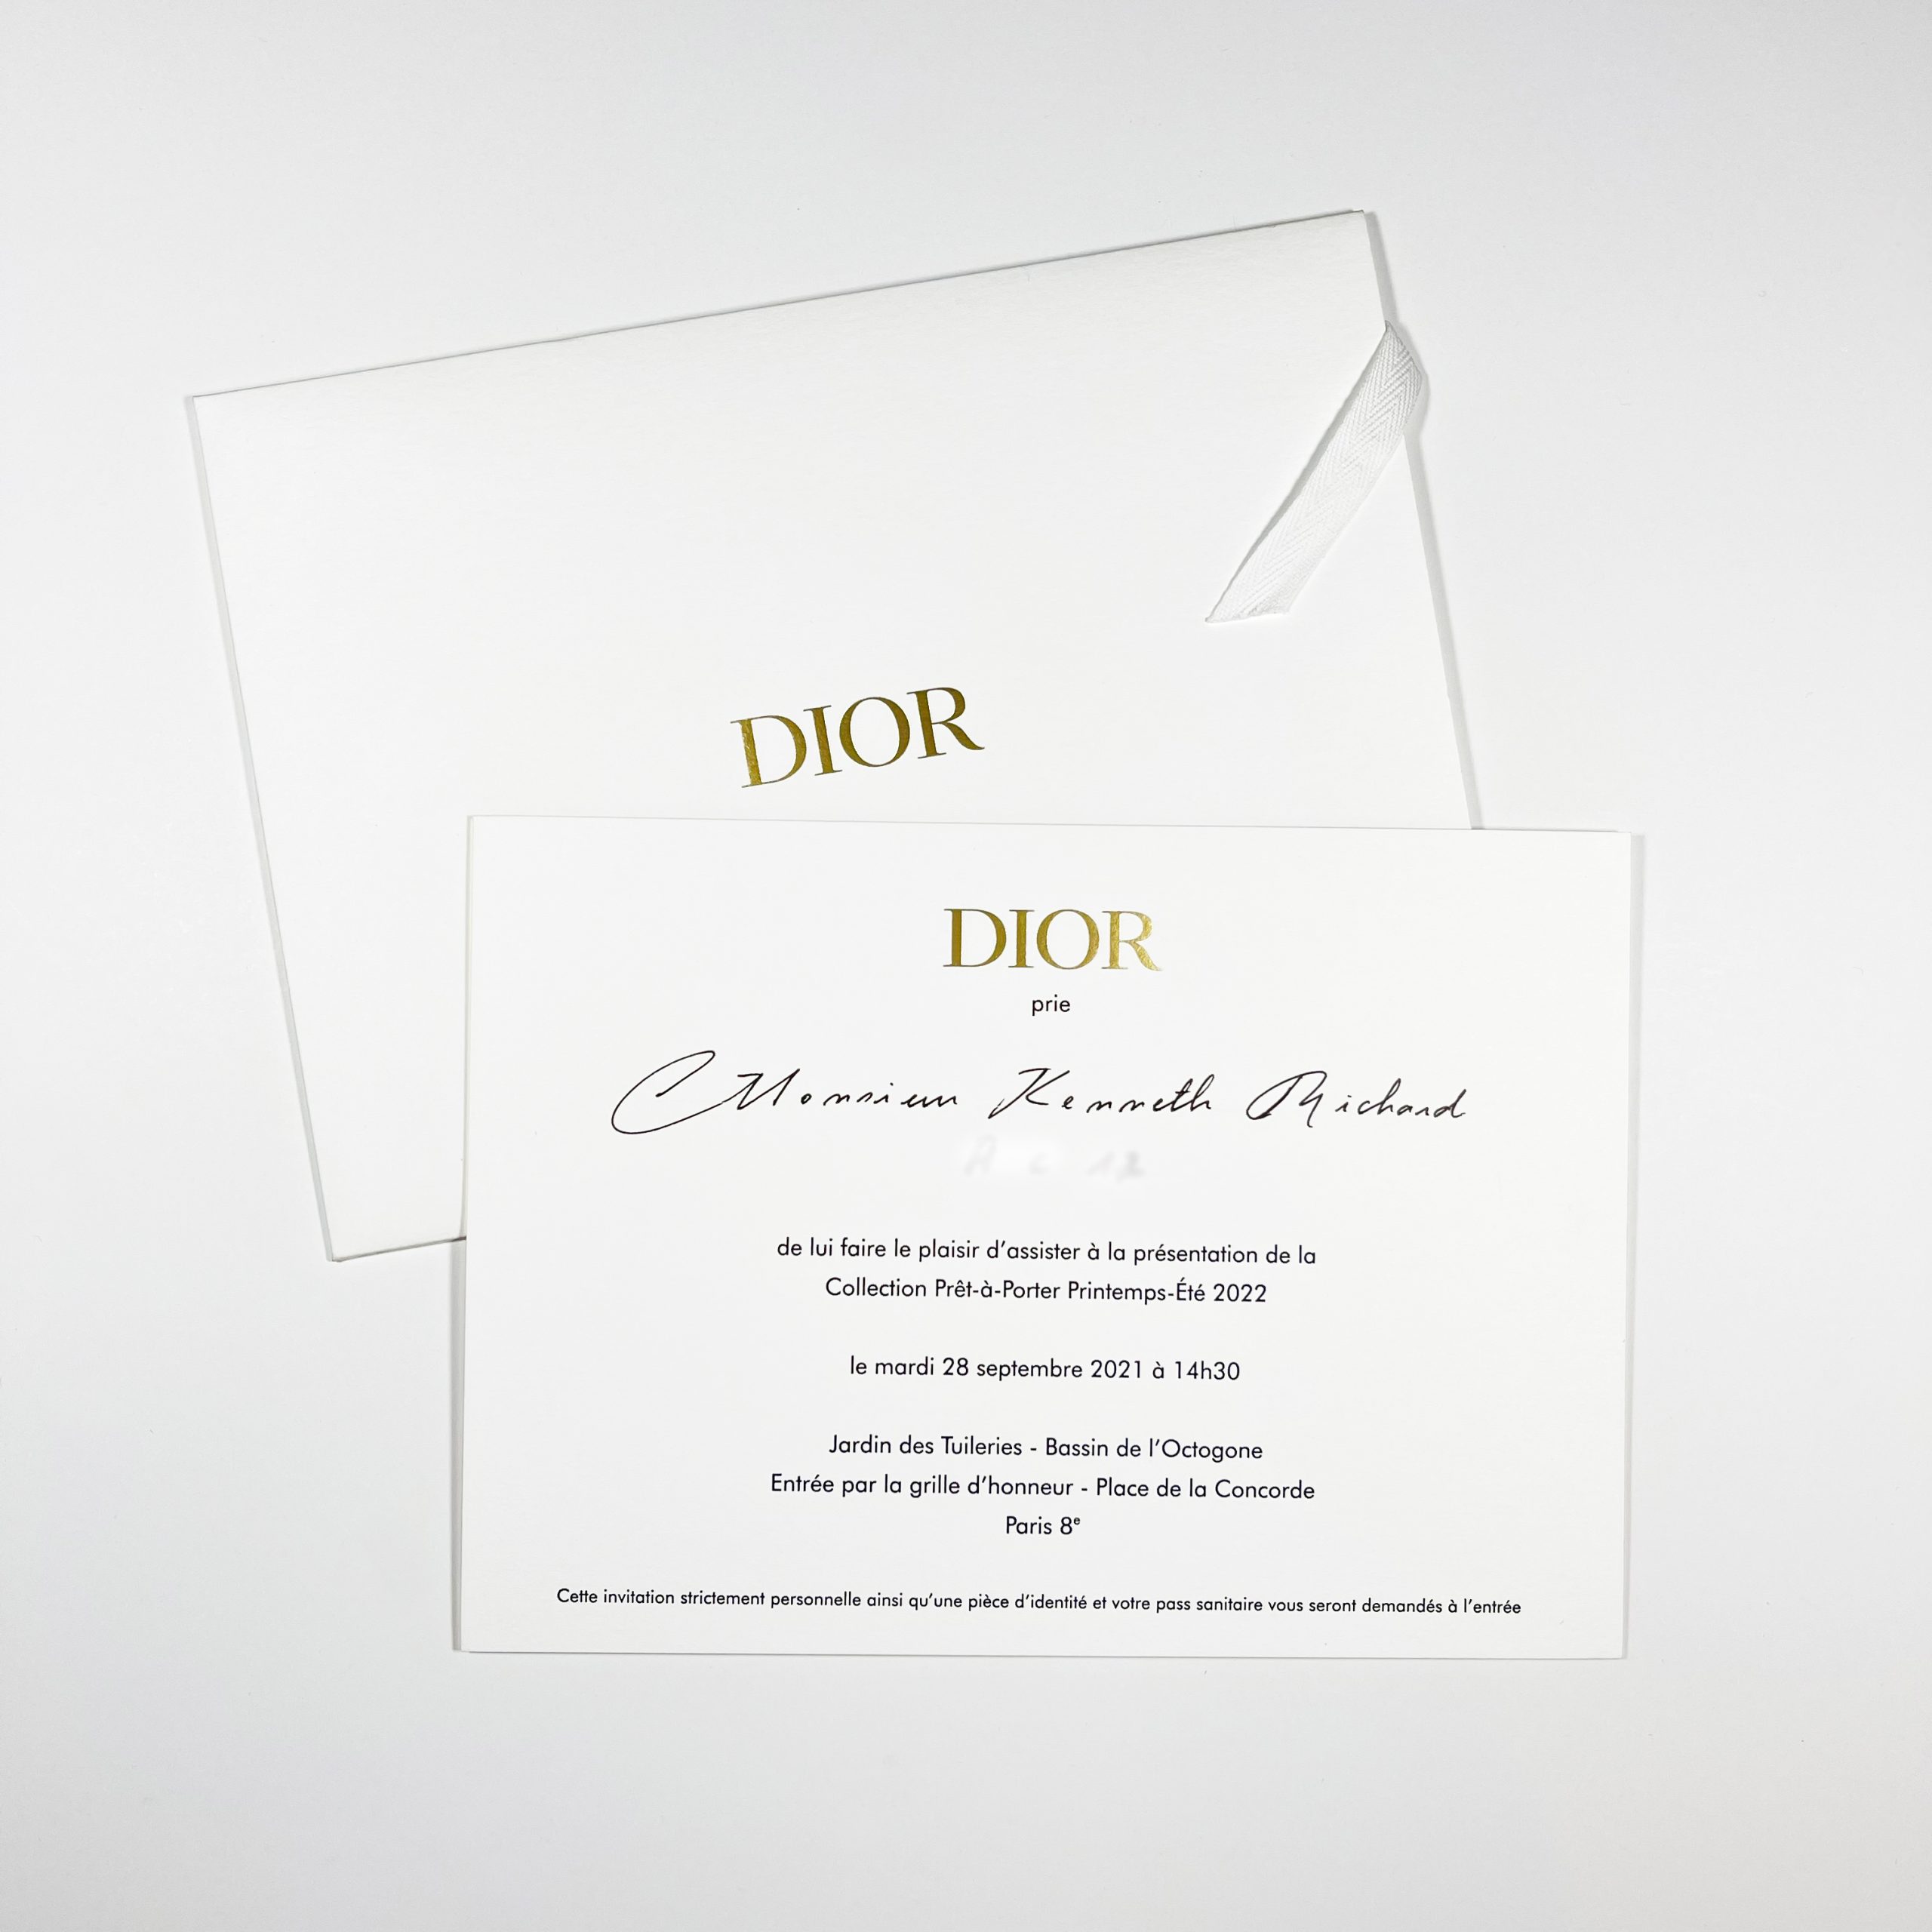 Got invited to the Dior mens show How sick is the invite So excited   TikTok